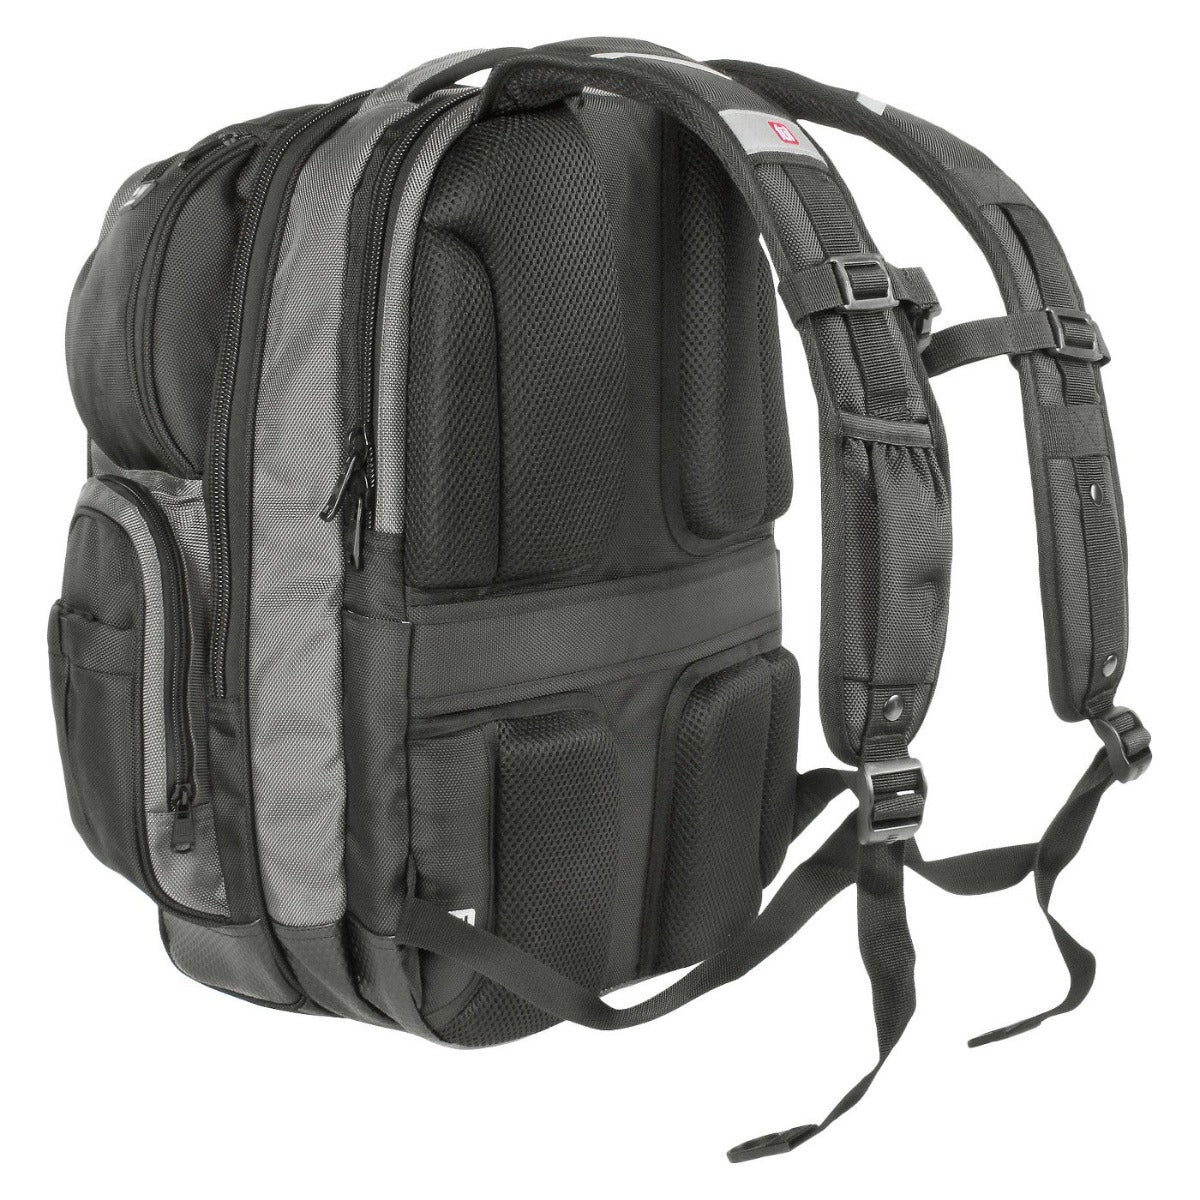 Big Easy-Ful 17" water resistant backpack gray and black